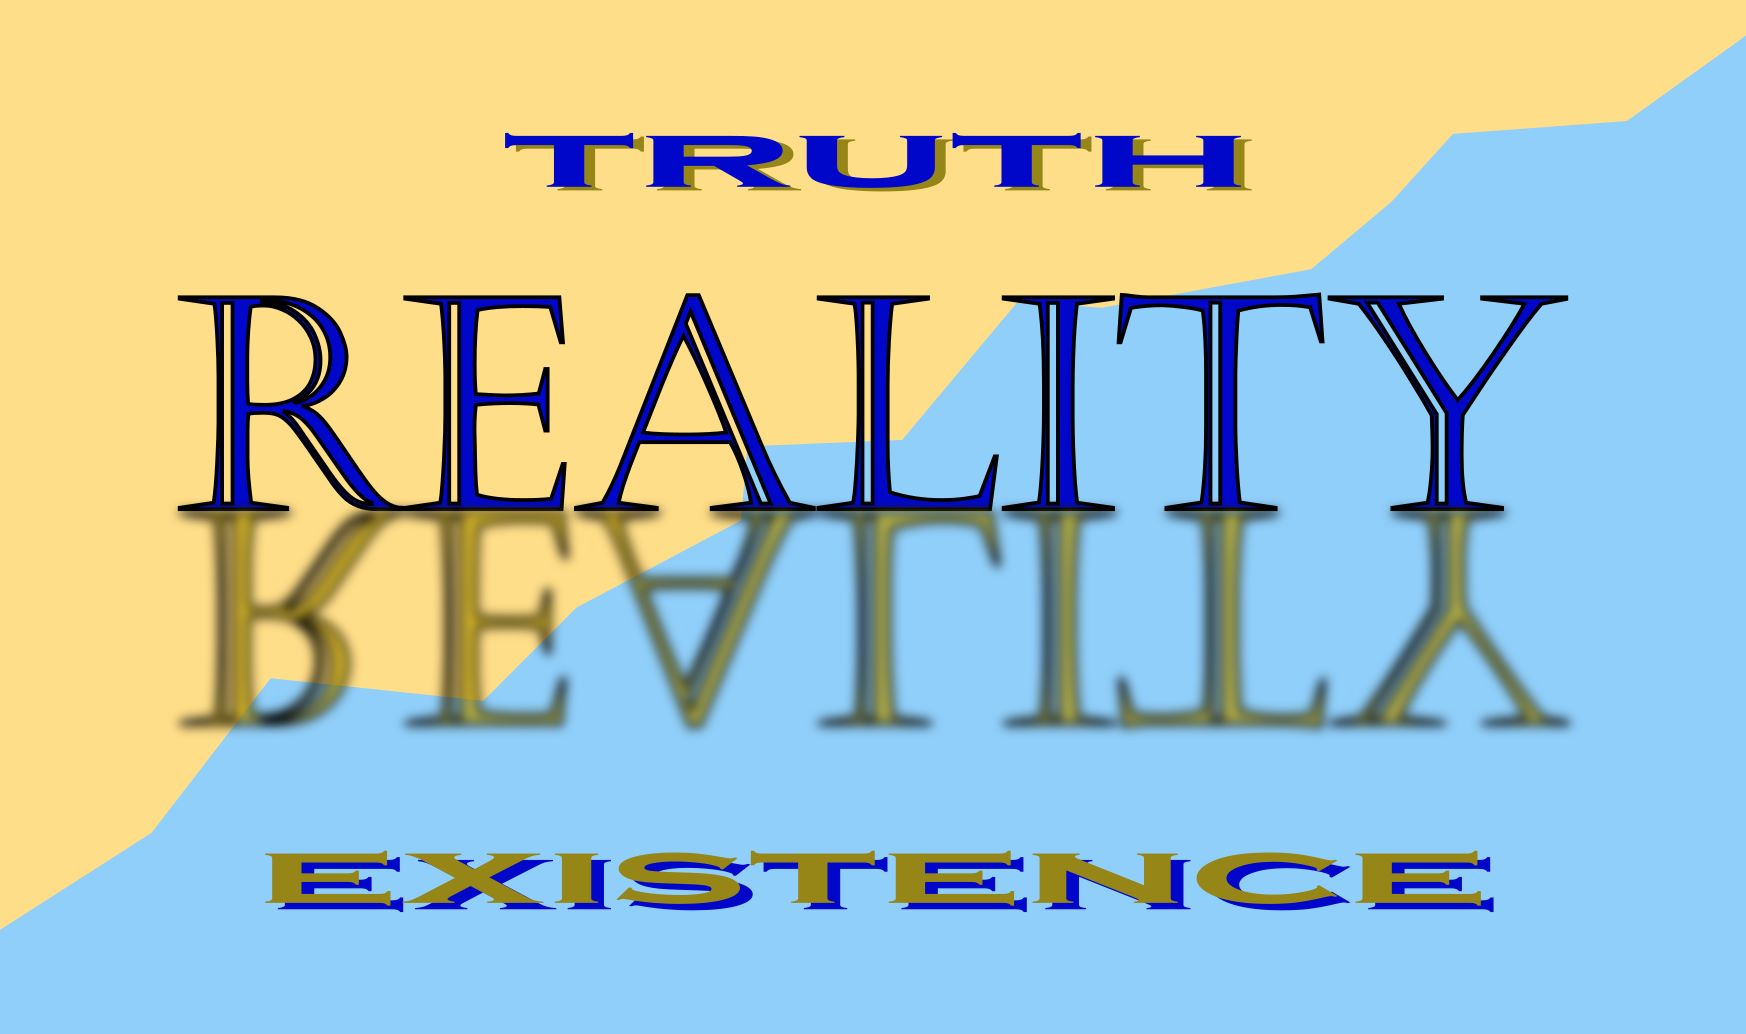 Reality is Polysemous